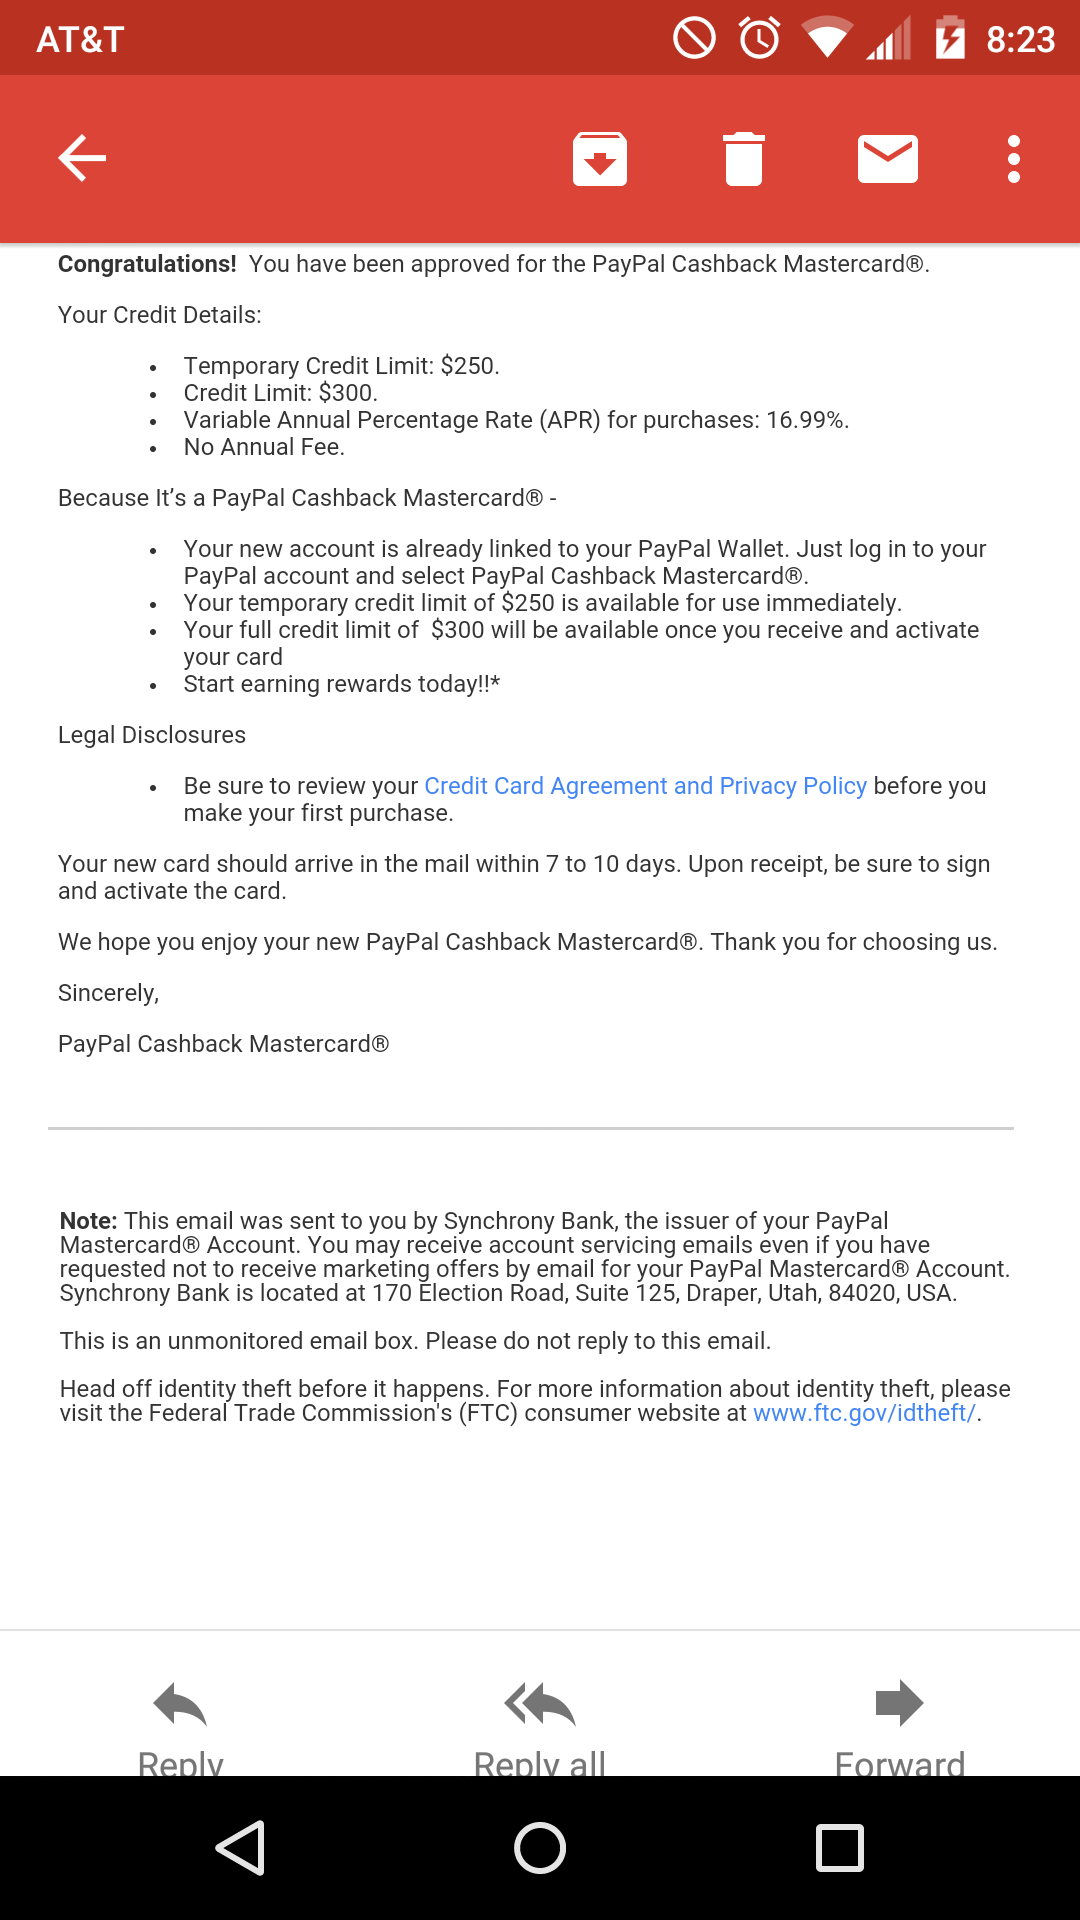 paypal 2 mastercard now publicly available  page 6